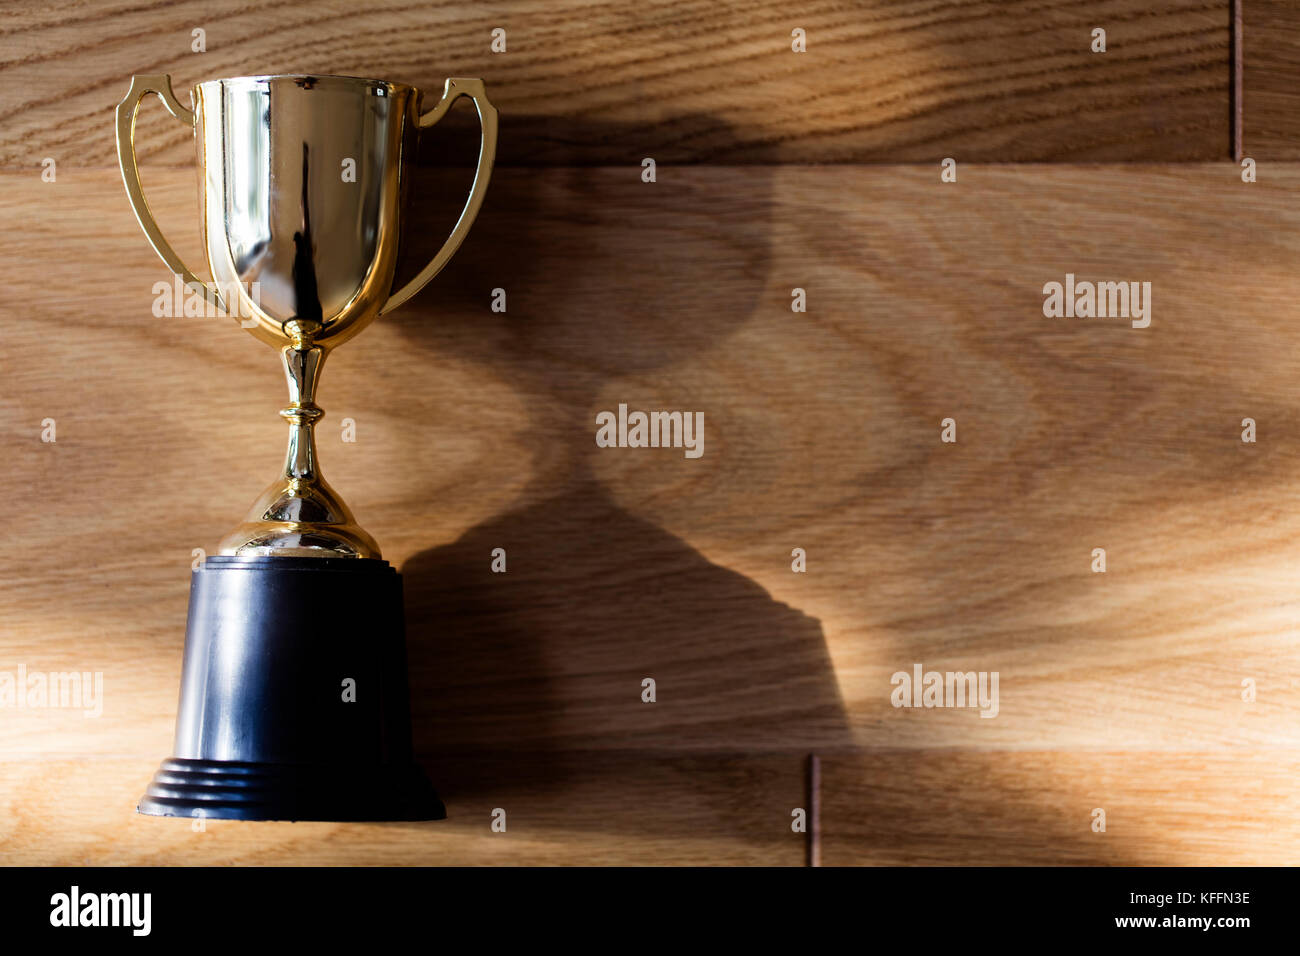 Gold winners trophy award on a wooden background Stock Photo